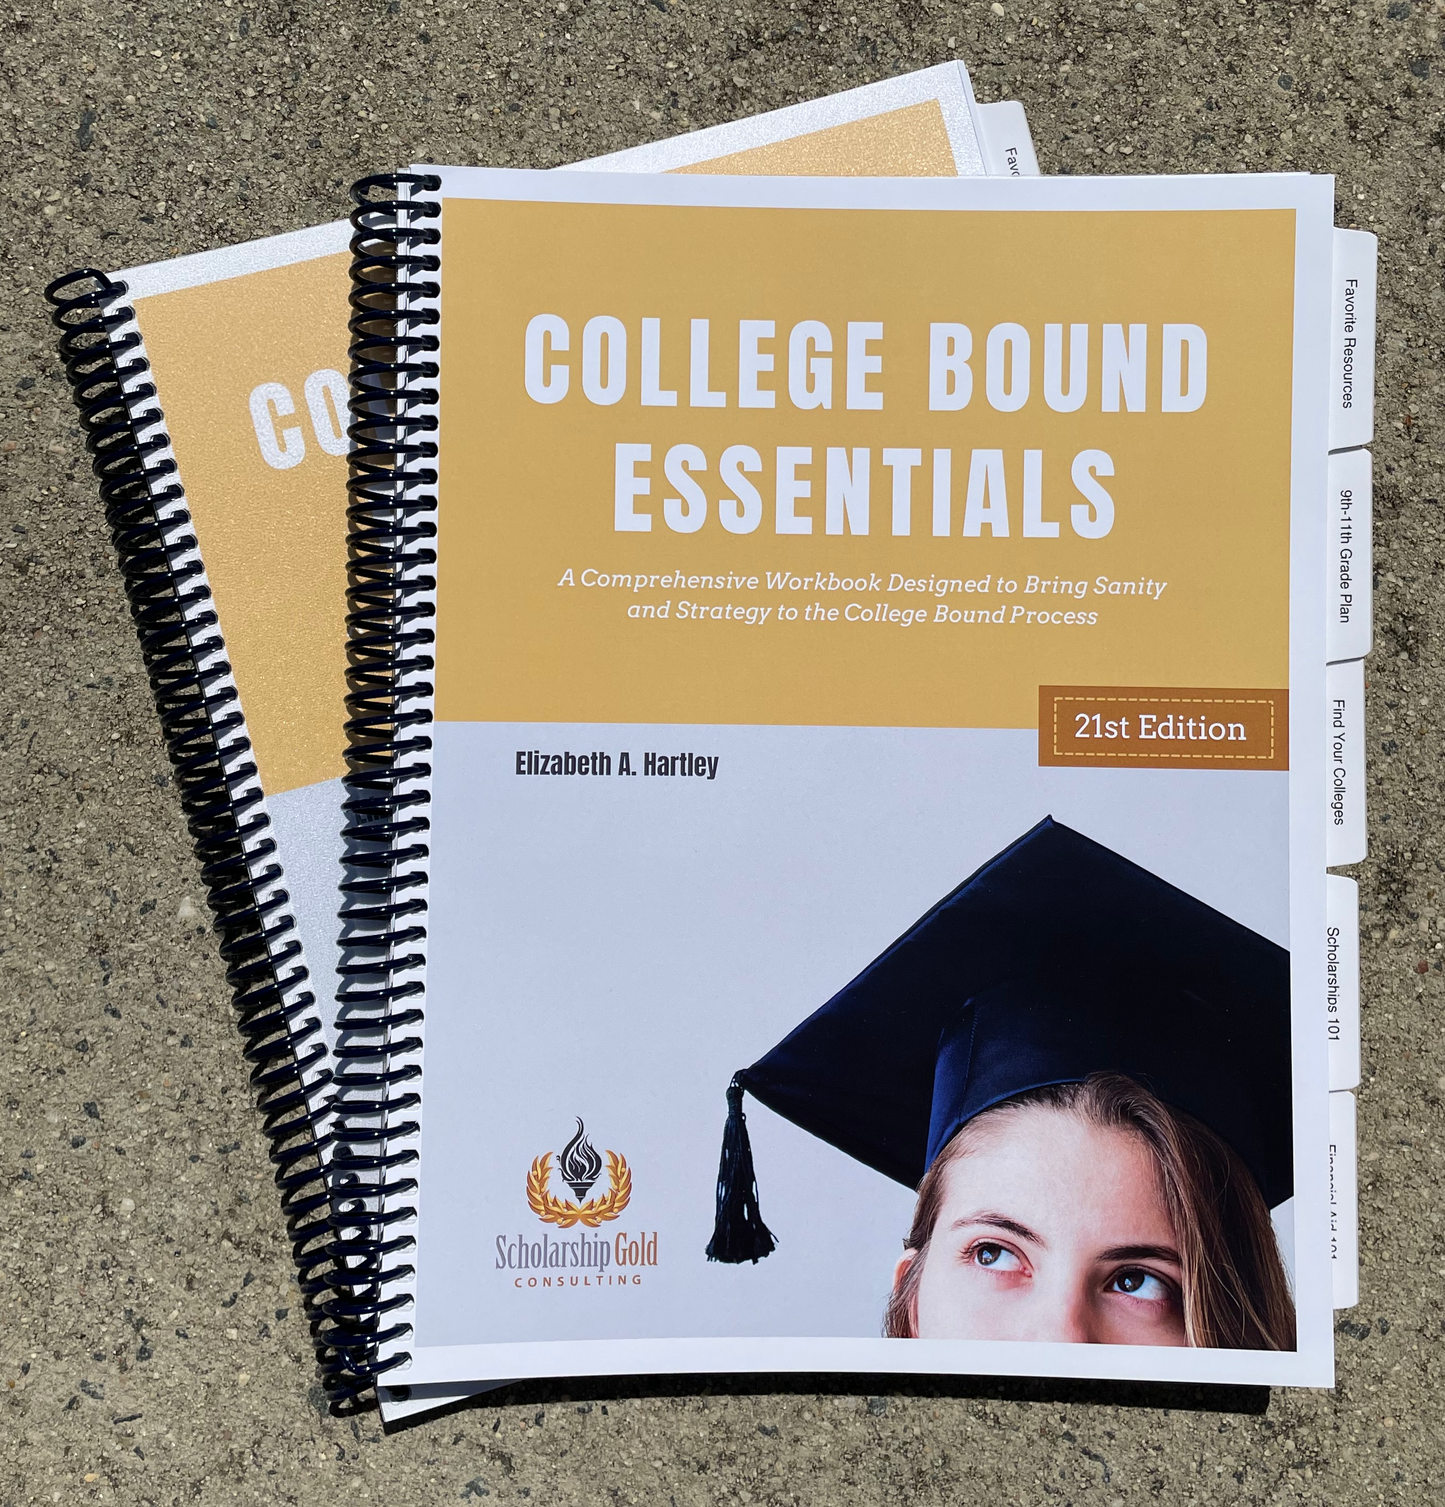 This is the workbook for our flagship "College Bounmd Essentials" workshop. The workbook will keep you organized and informed during your college preparations. Sectuion include: Useful Resources, Setting Your College Admissions Game Plan, Finding Your Best Fit Colleges, and Identifying Sources of Financial Aid and Scholarships.